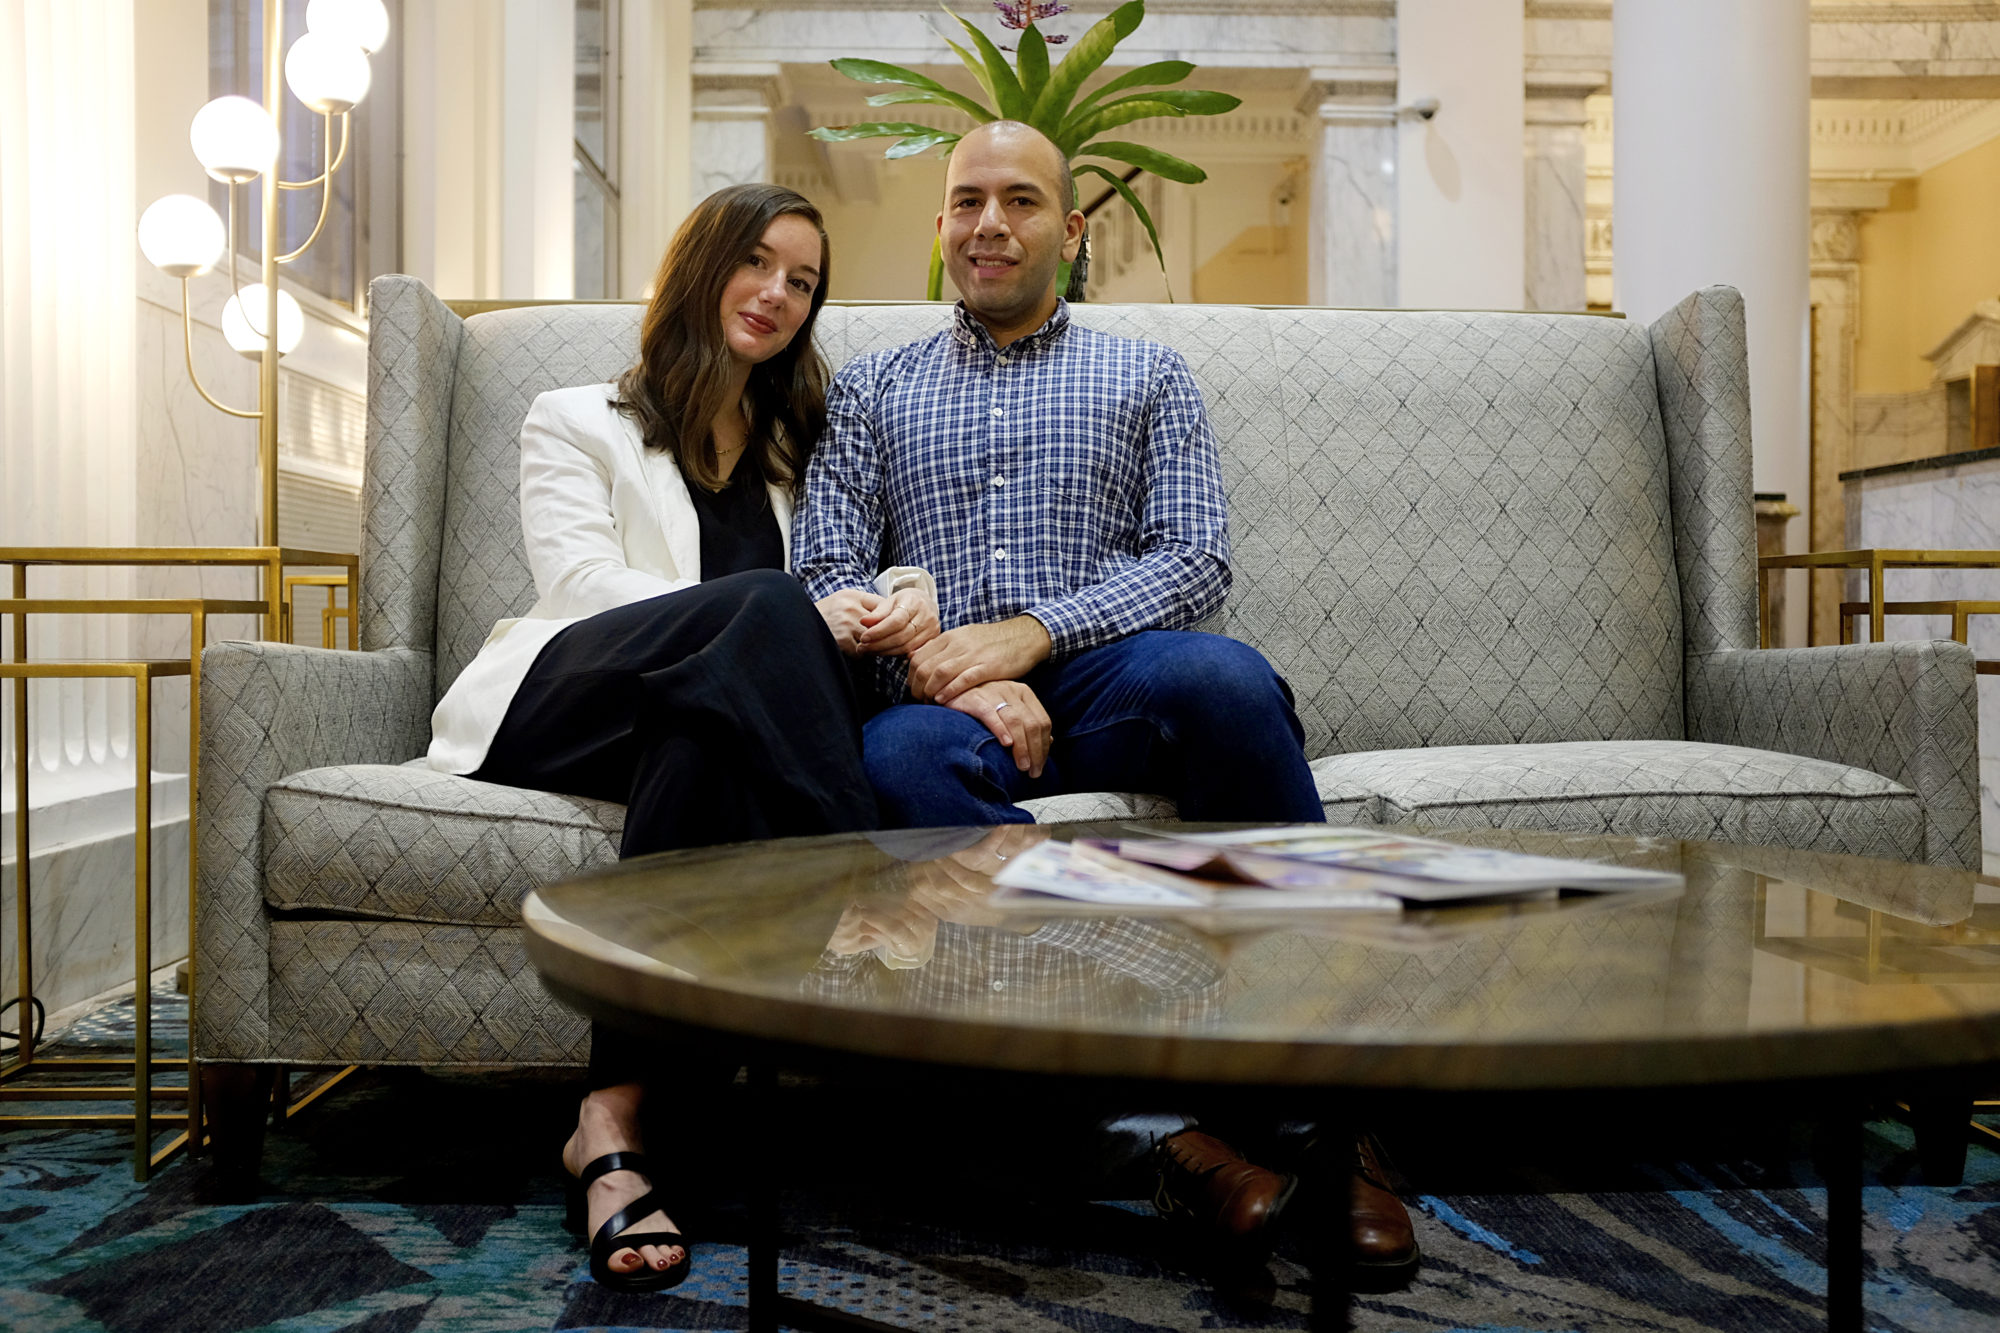 Alyssa and MIchael on a sofa in the lobby